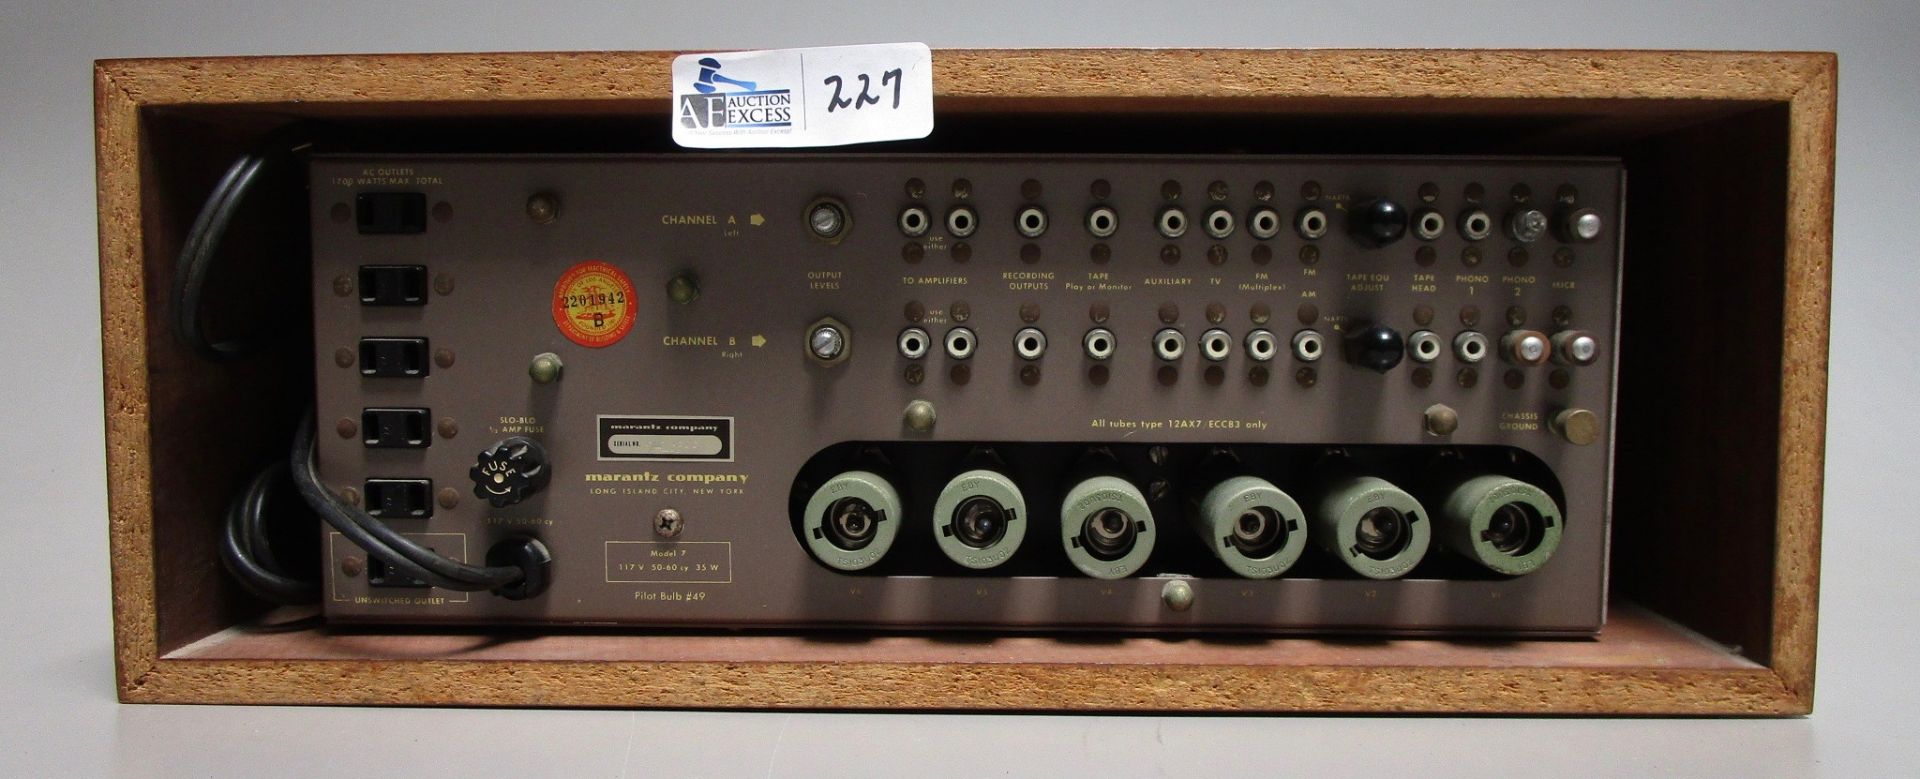 MARANTZ STEREO CONSOLE MODEL 7 TUBE PREAMP TESTED AND WORKING WITH VINTAGE TELEFUNKEN 12AX7 TUBES - Image 2 of 2